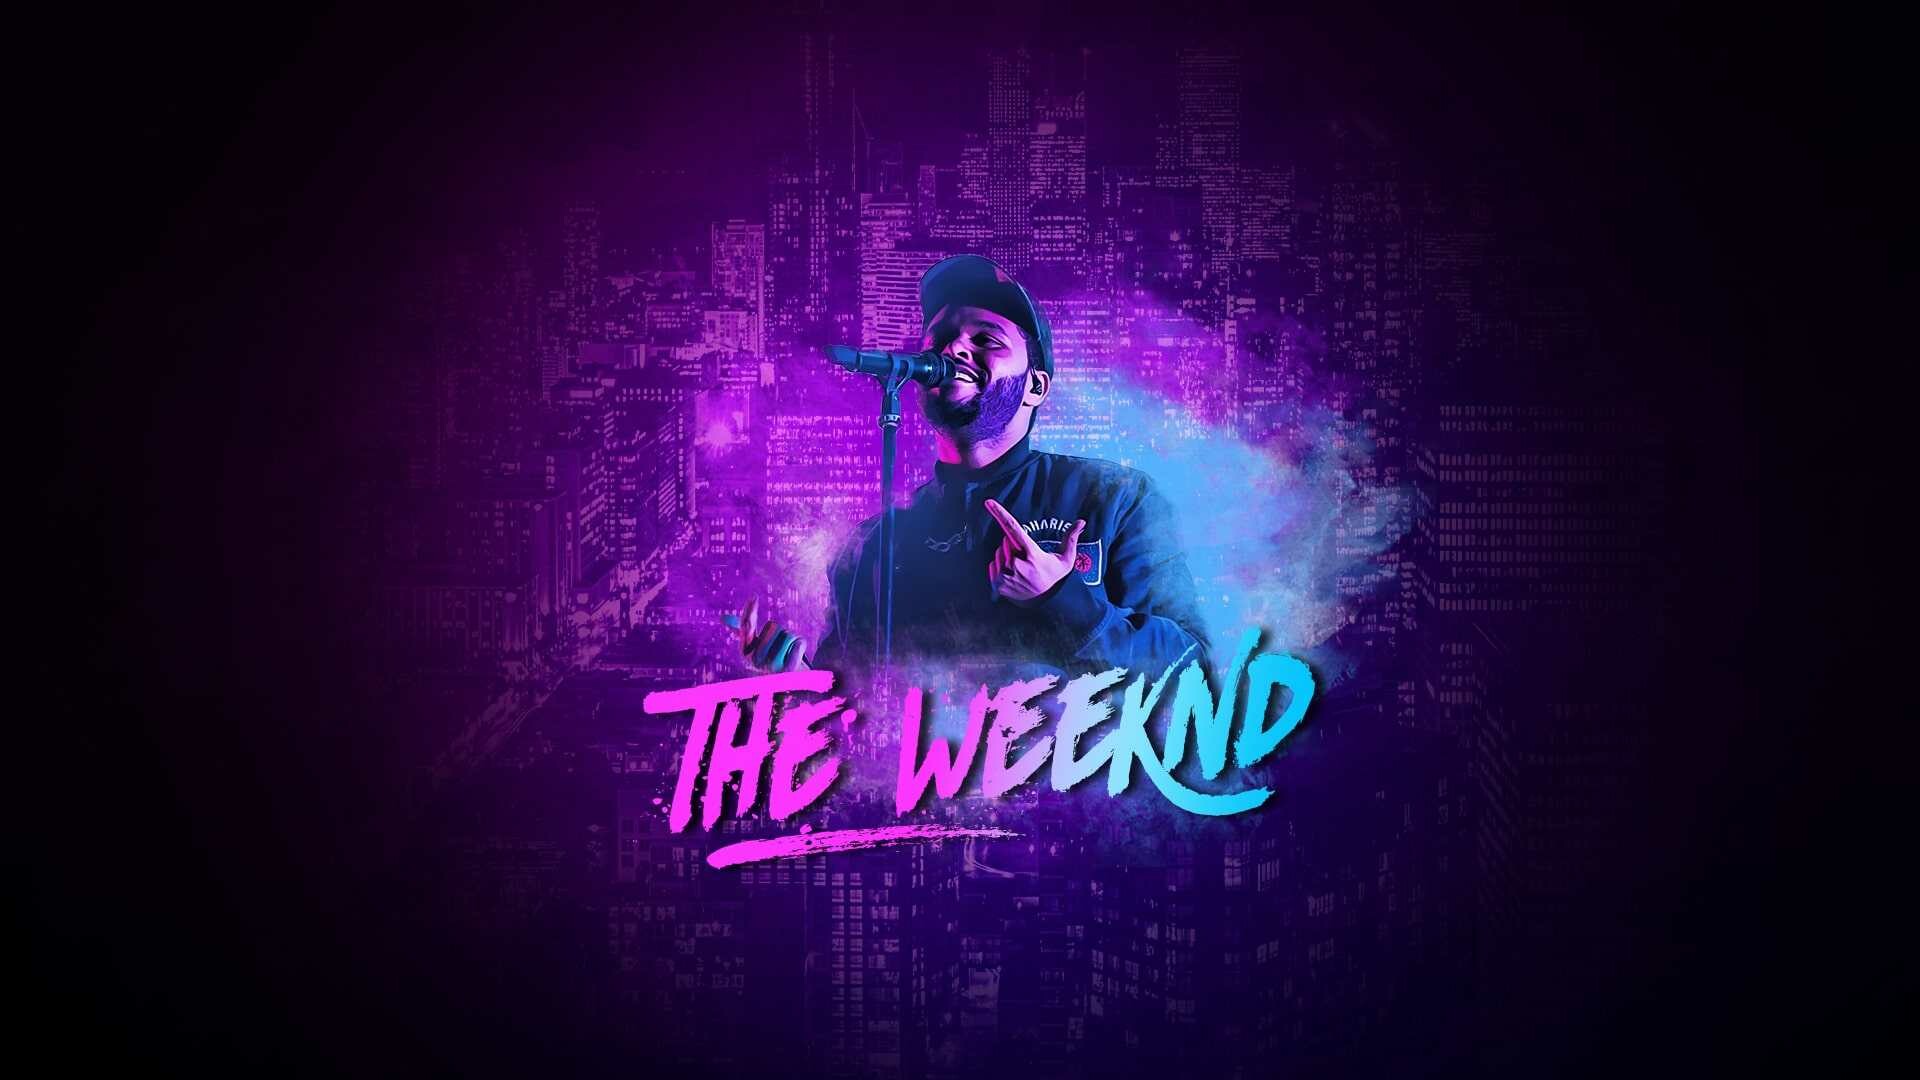 The Weeknd: Tesfaye, Released his second-greatest hits album The Highlights, 2021. 1920x1080 Full HD Wallpaper.